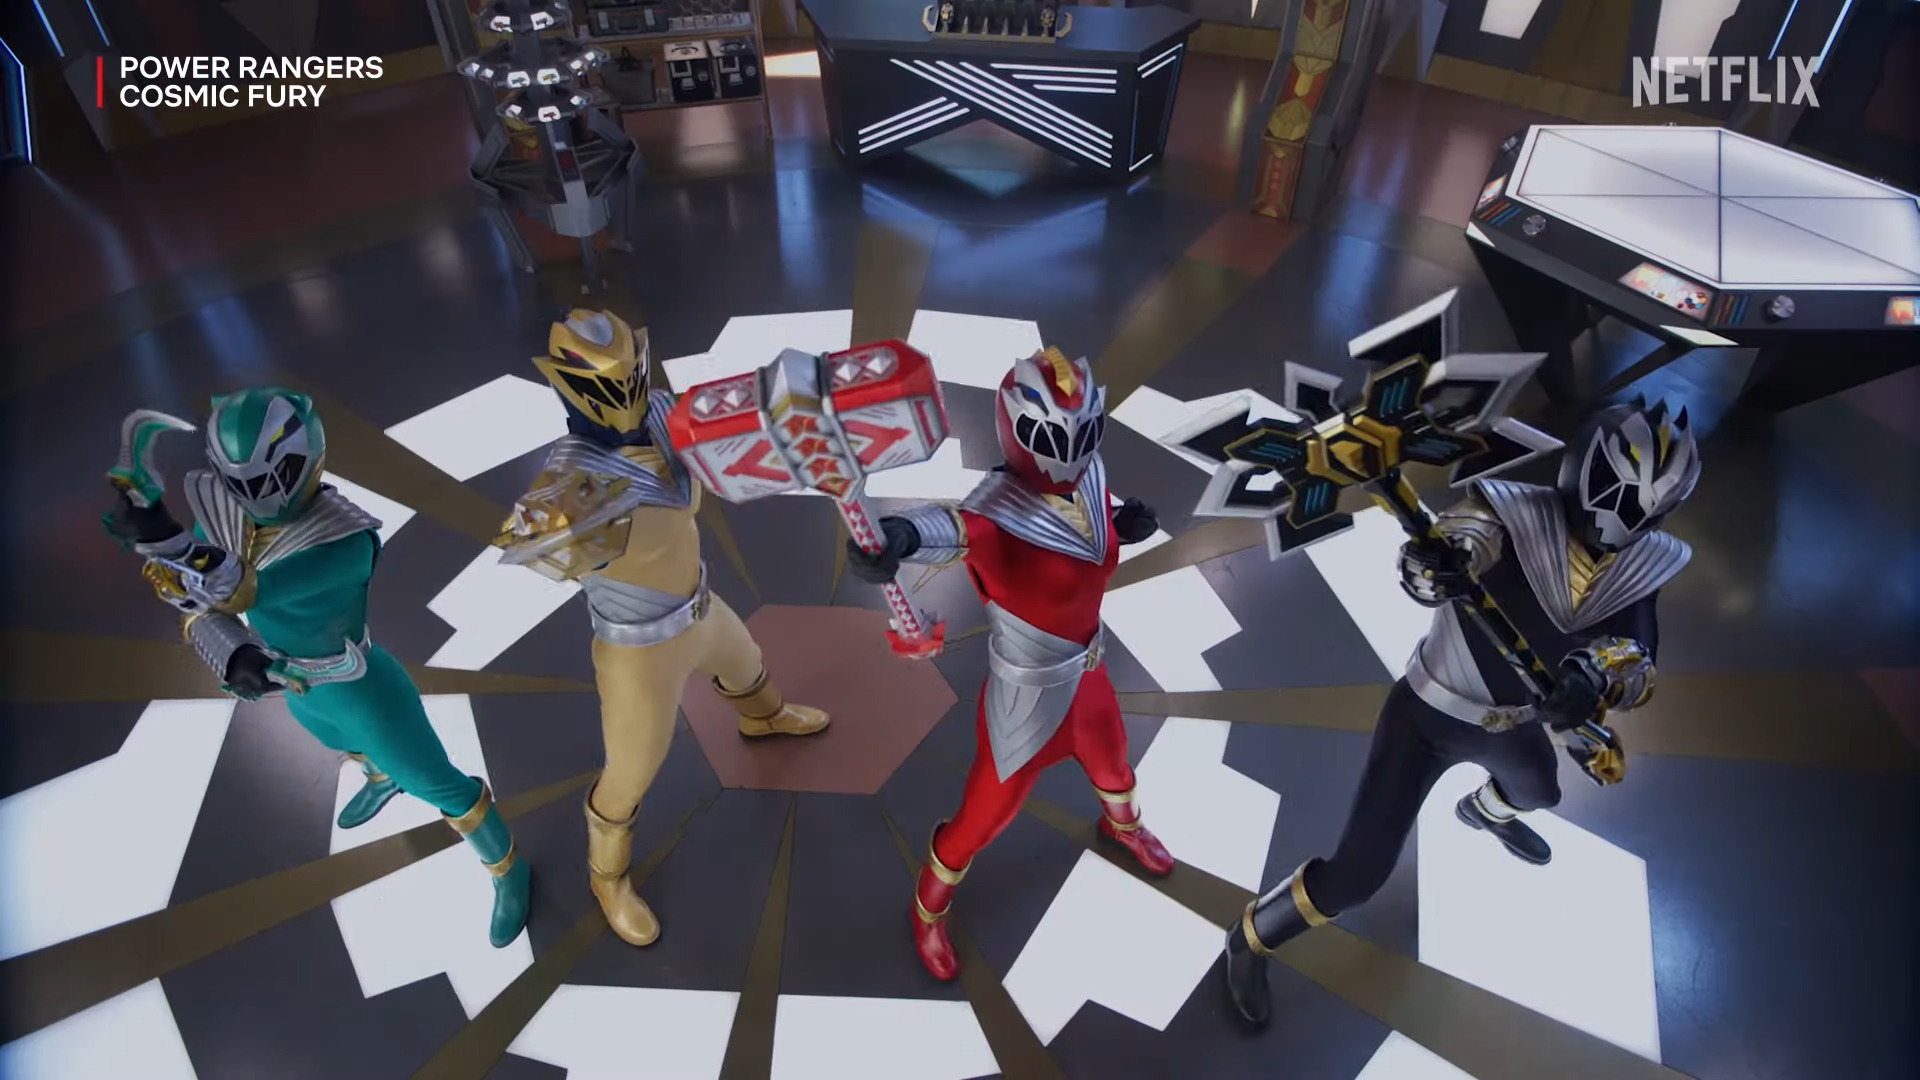 The titular team stands tall in the first trailer for 'Power Rangers: Cosmic Fury' (2023), Netflix